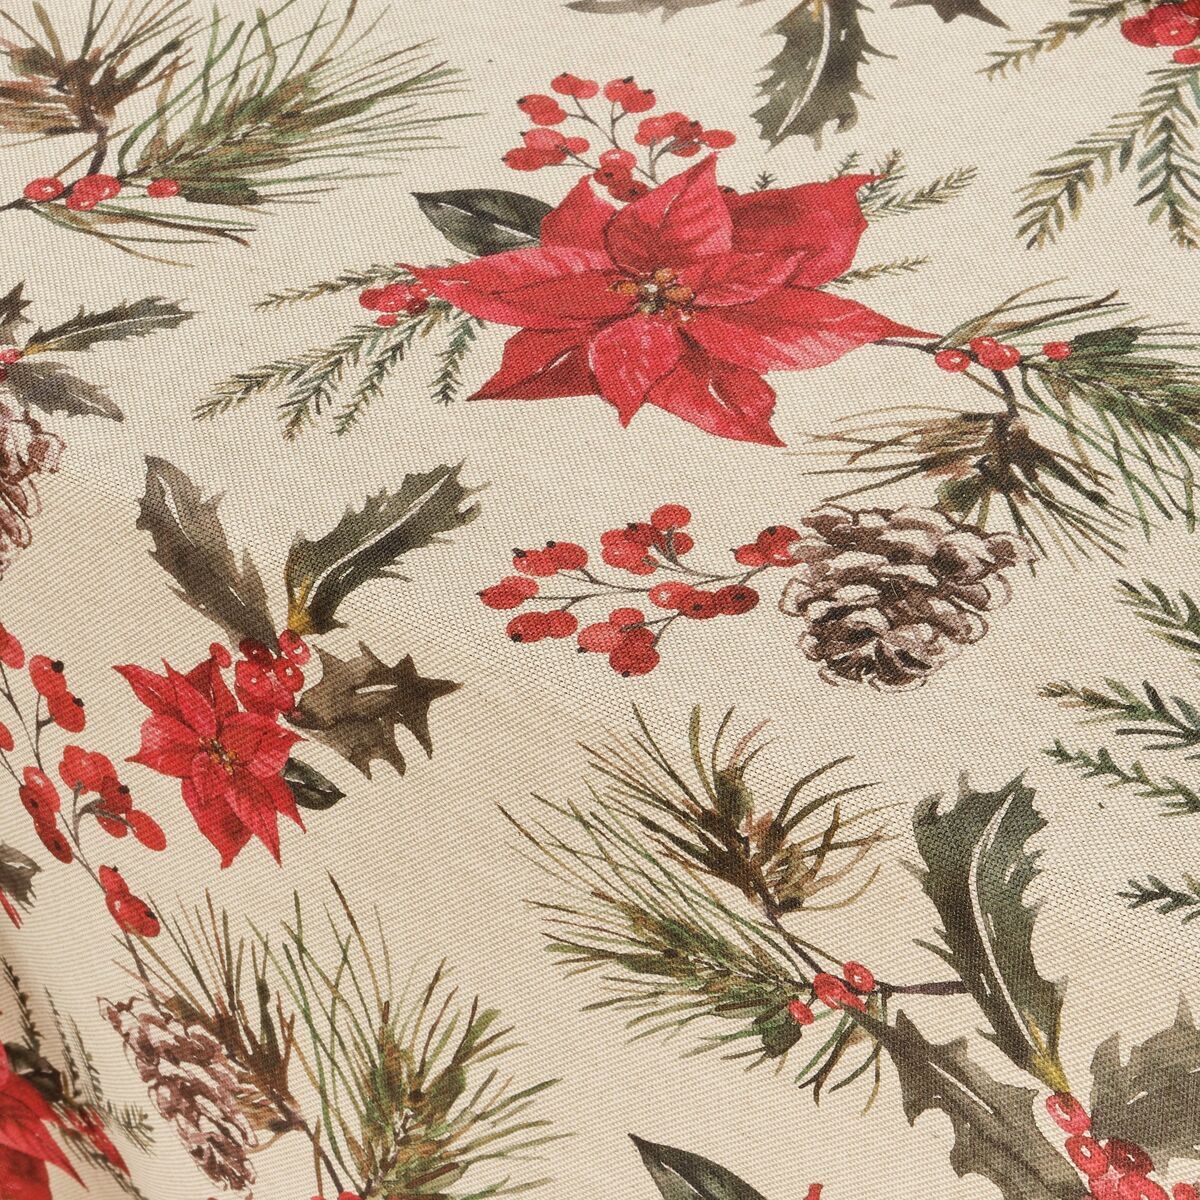 Stain-proof tablecloth Mauré Christmas Flowers 155 x 155 cm